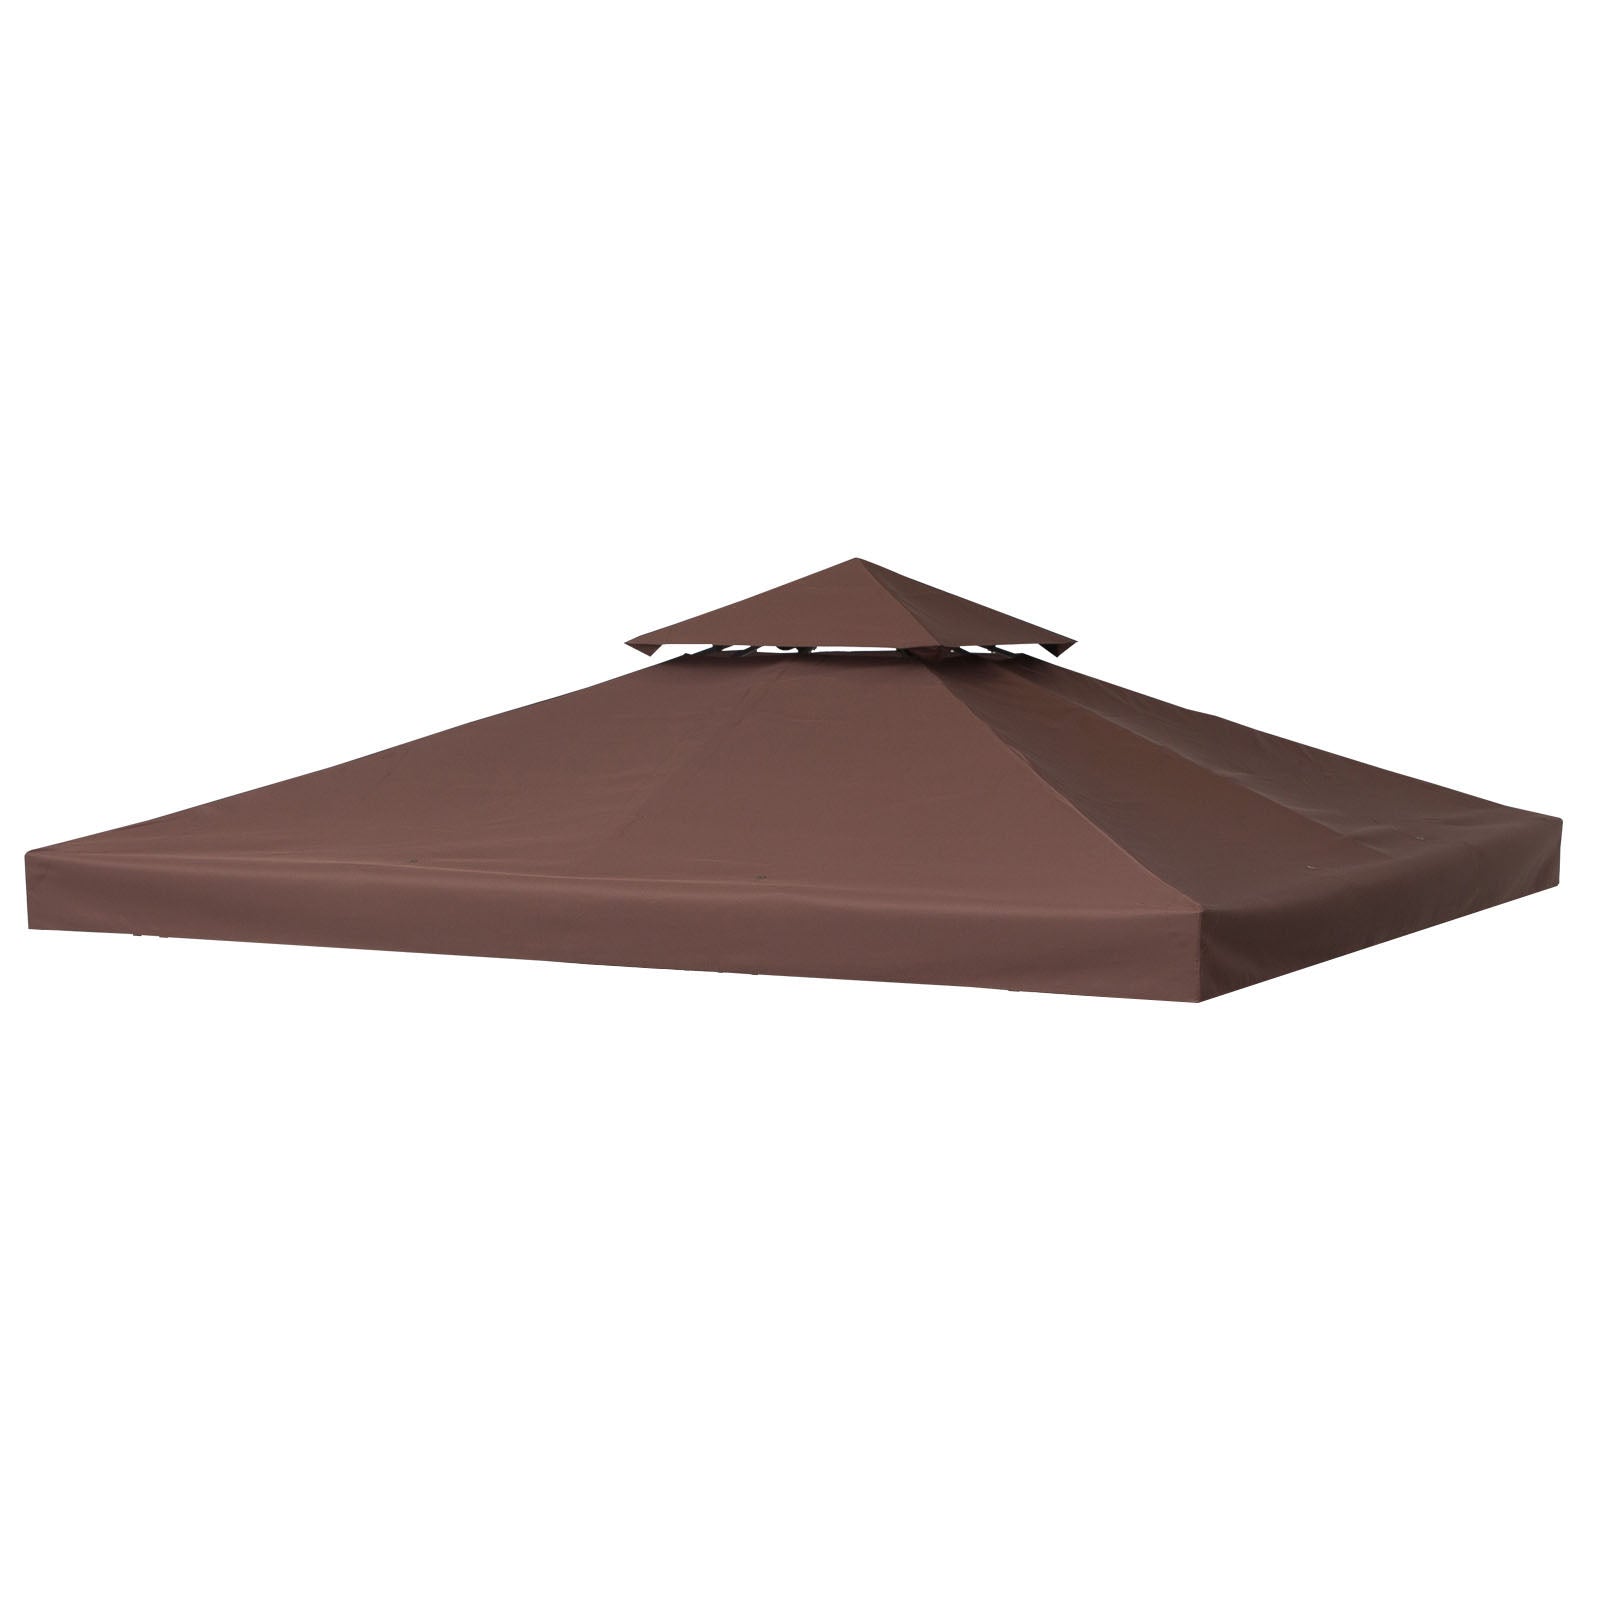 Outsunny 3(m) 2 Tier Garden Gazebo Top Cover Replacement Canopy Roof Coffee  | TJ Hughes